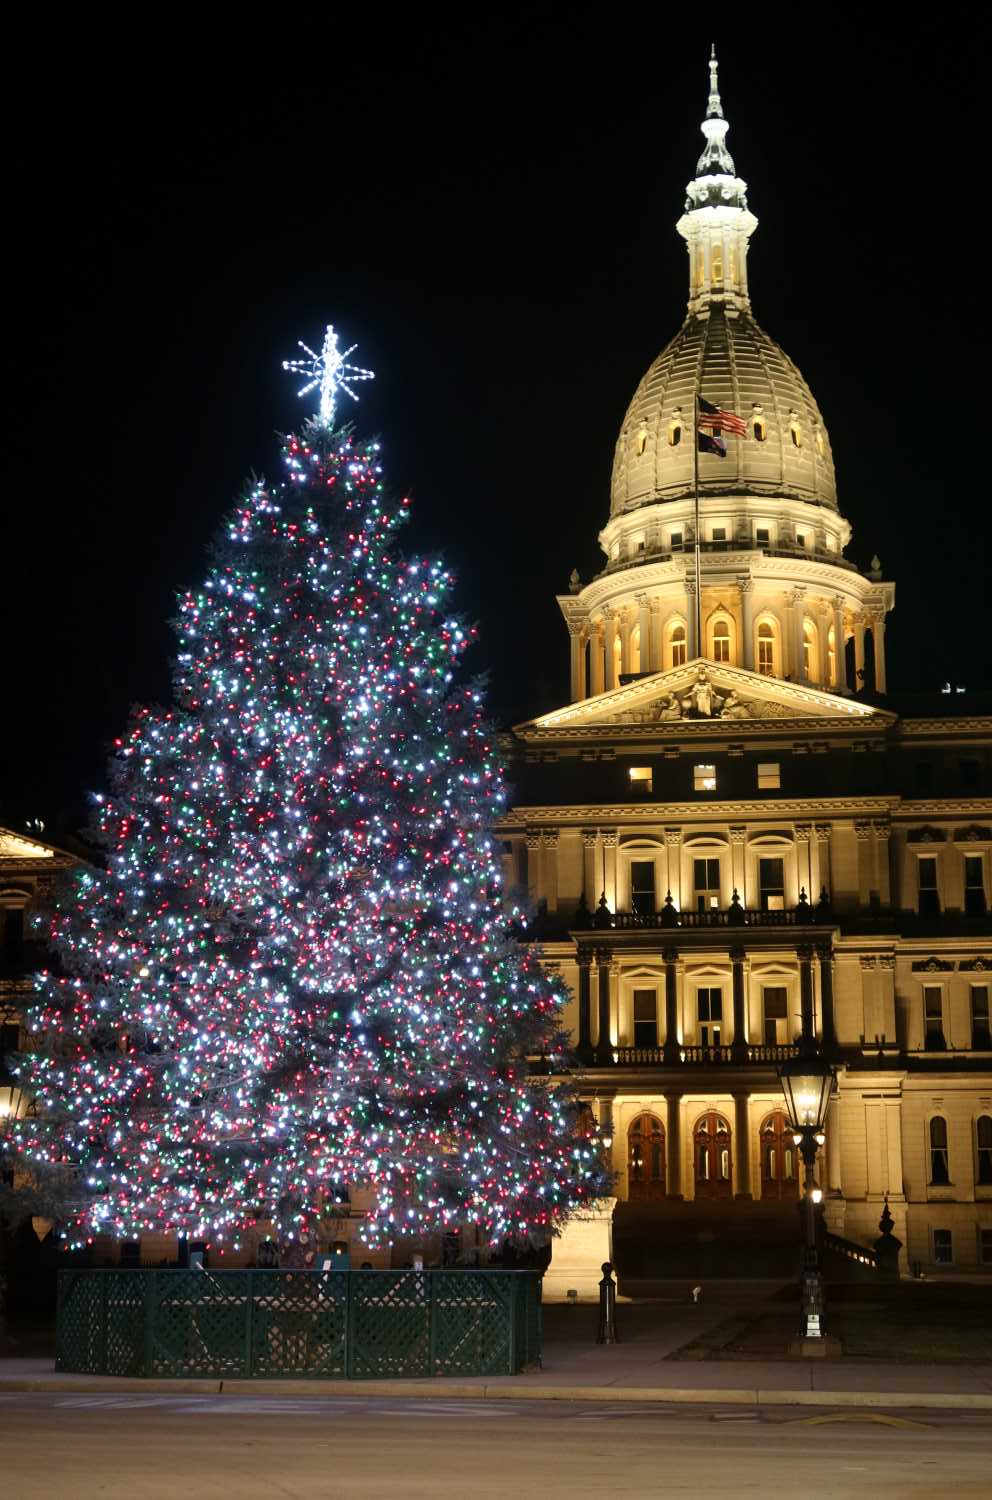 Michigan's State Capitol Building with the Lighted Christmas Tree